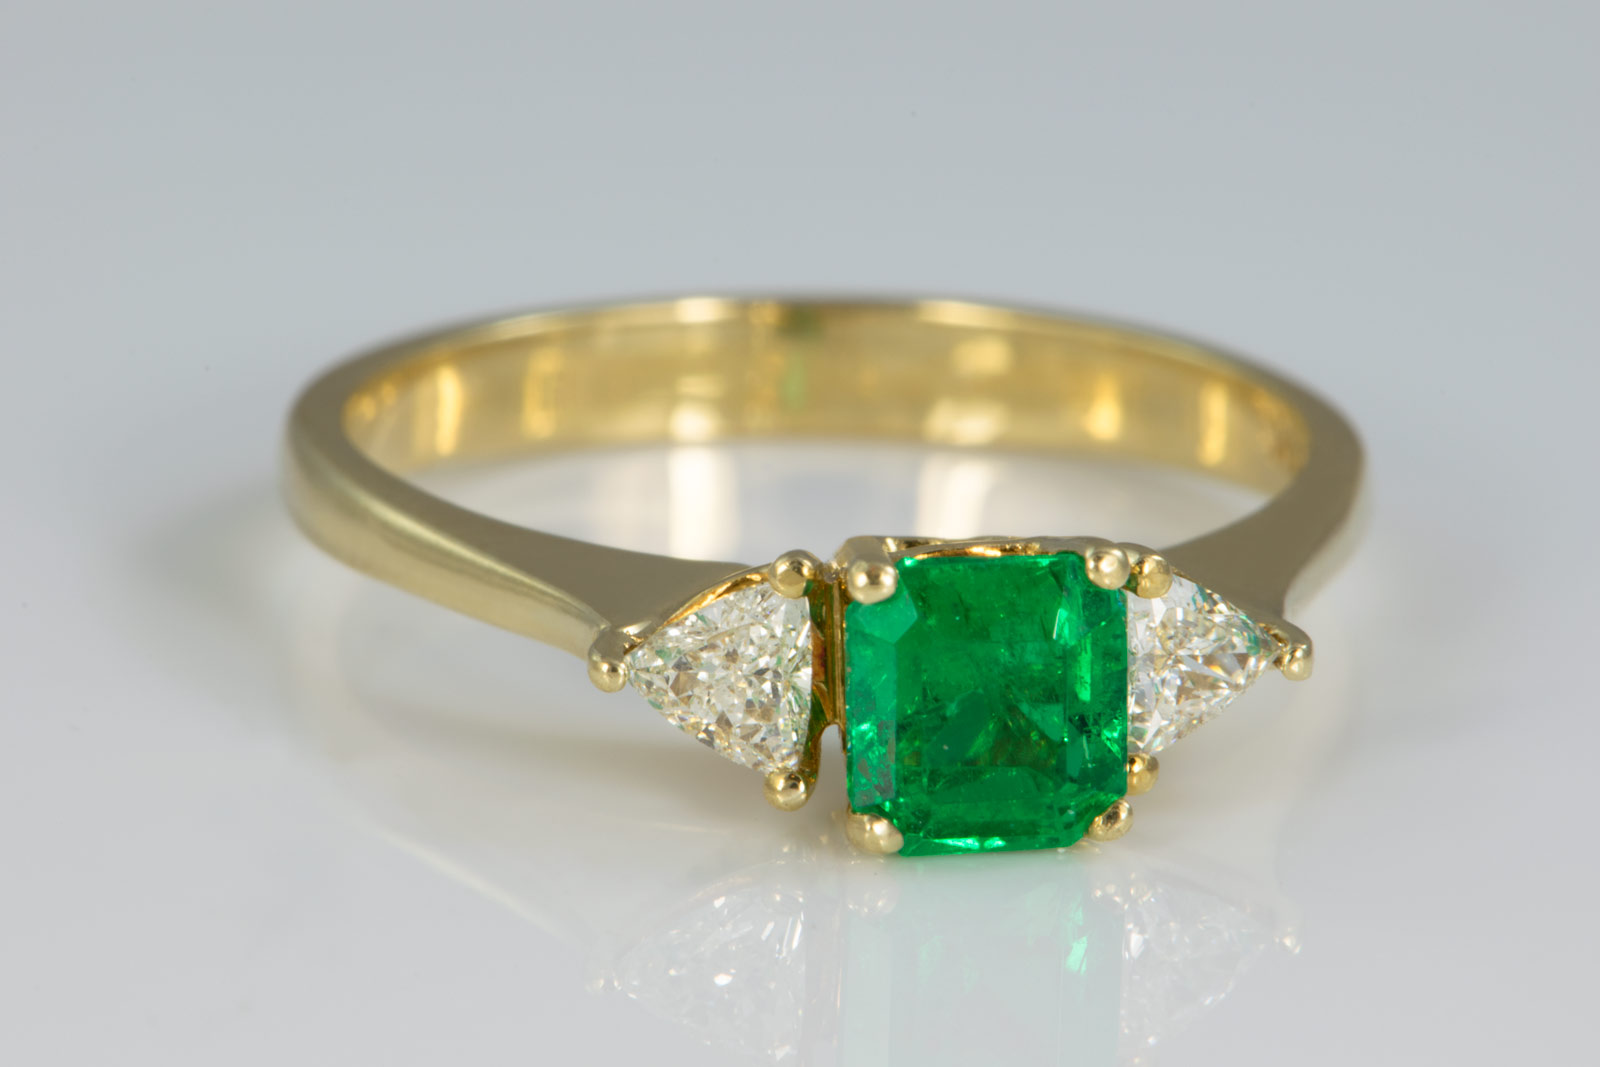 May we show you a lovely emerald piece?